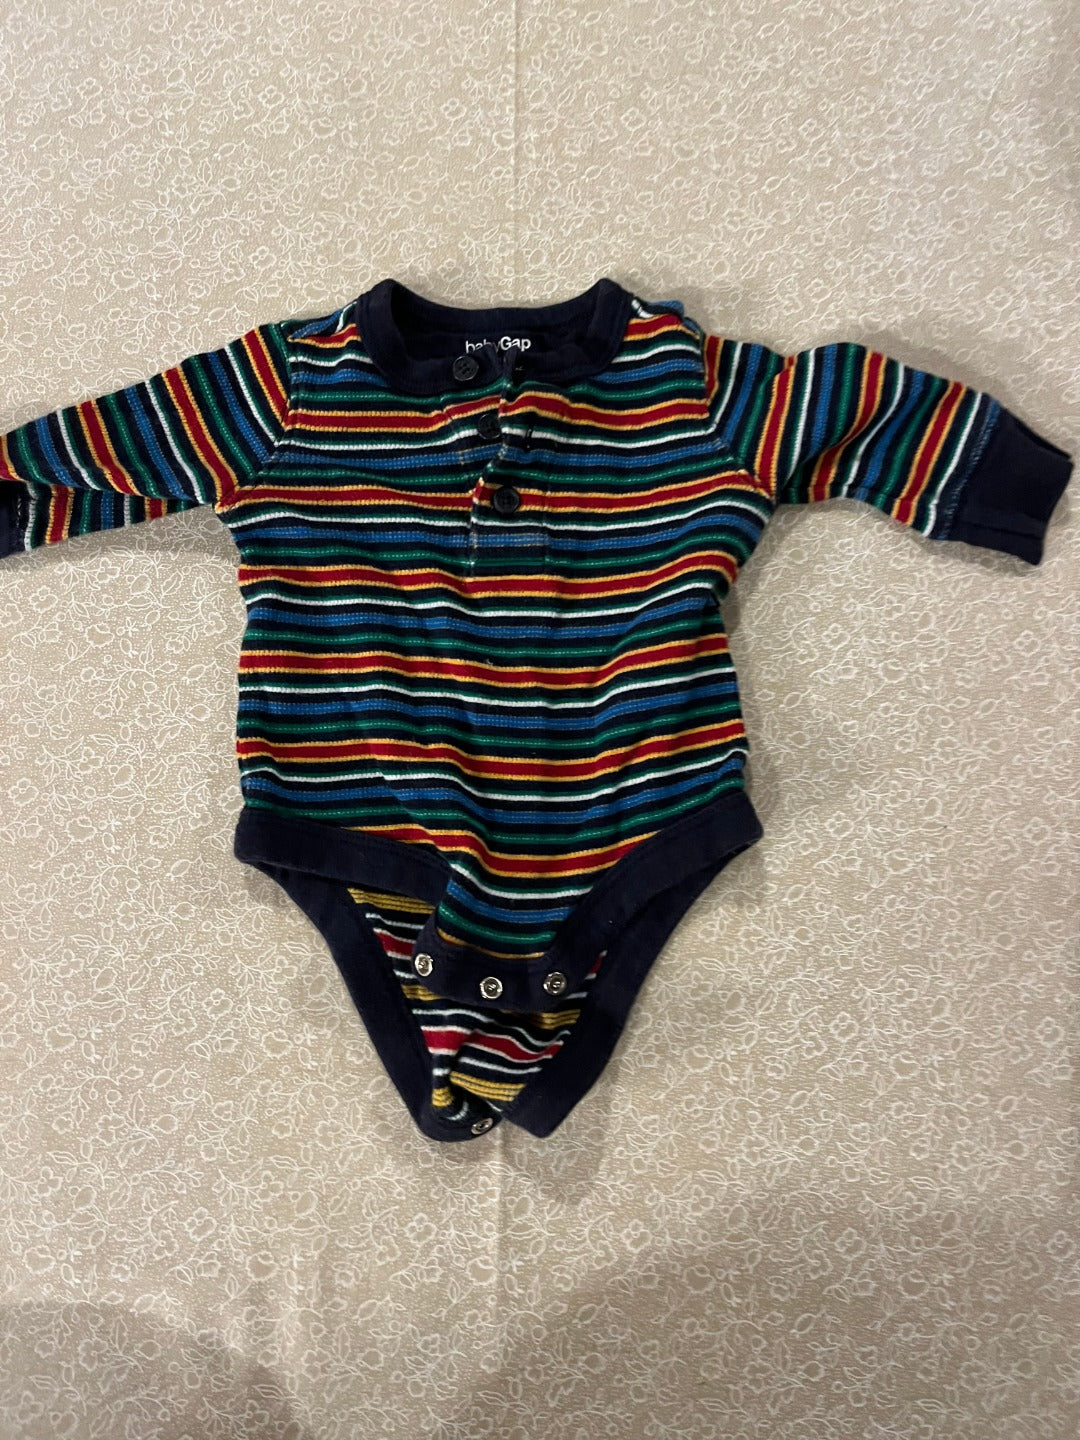 3-6-month-shirt-baby-gap-long-sleeve-colour-striped